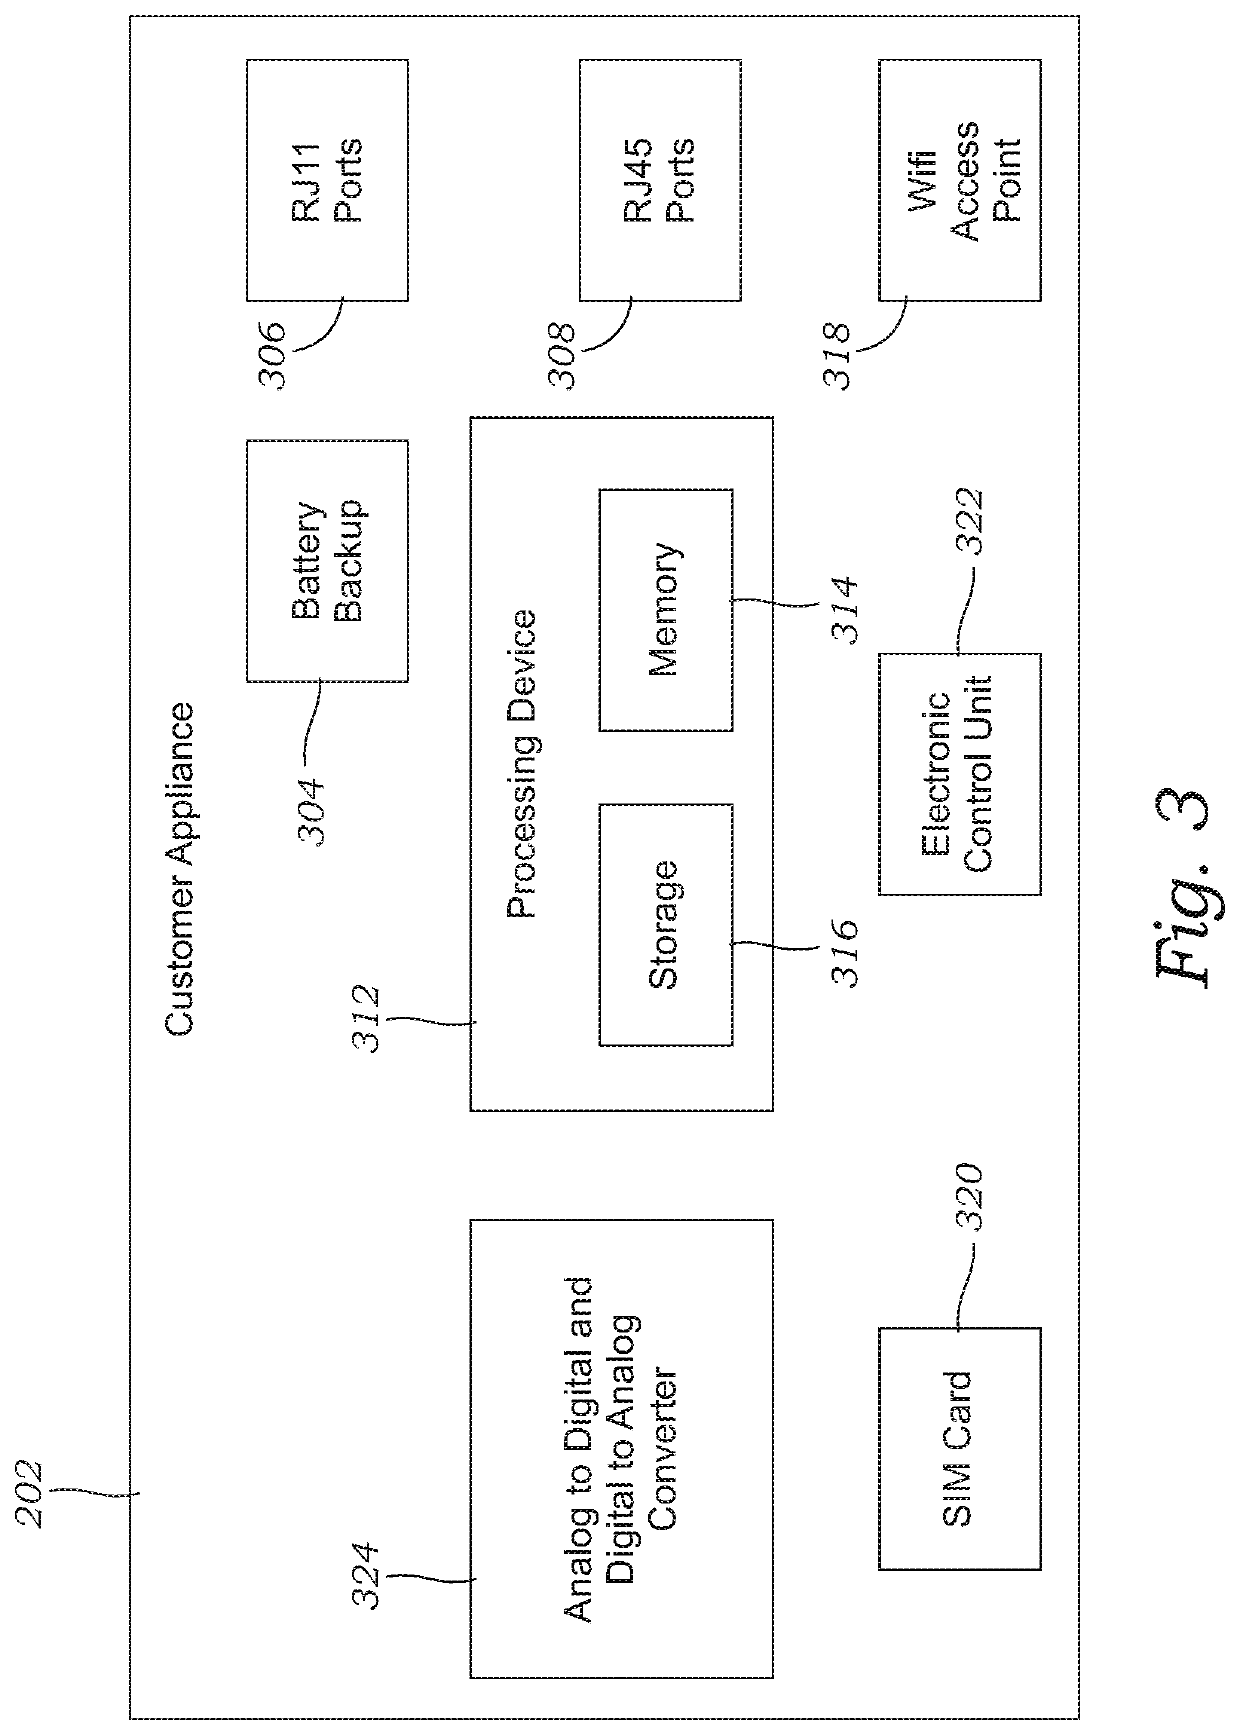 Analog and digital communication system for interfacing plain old telephone service devices with a network